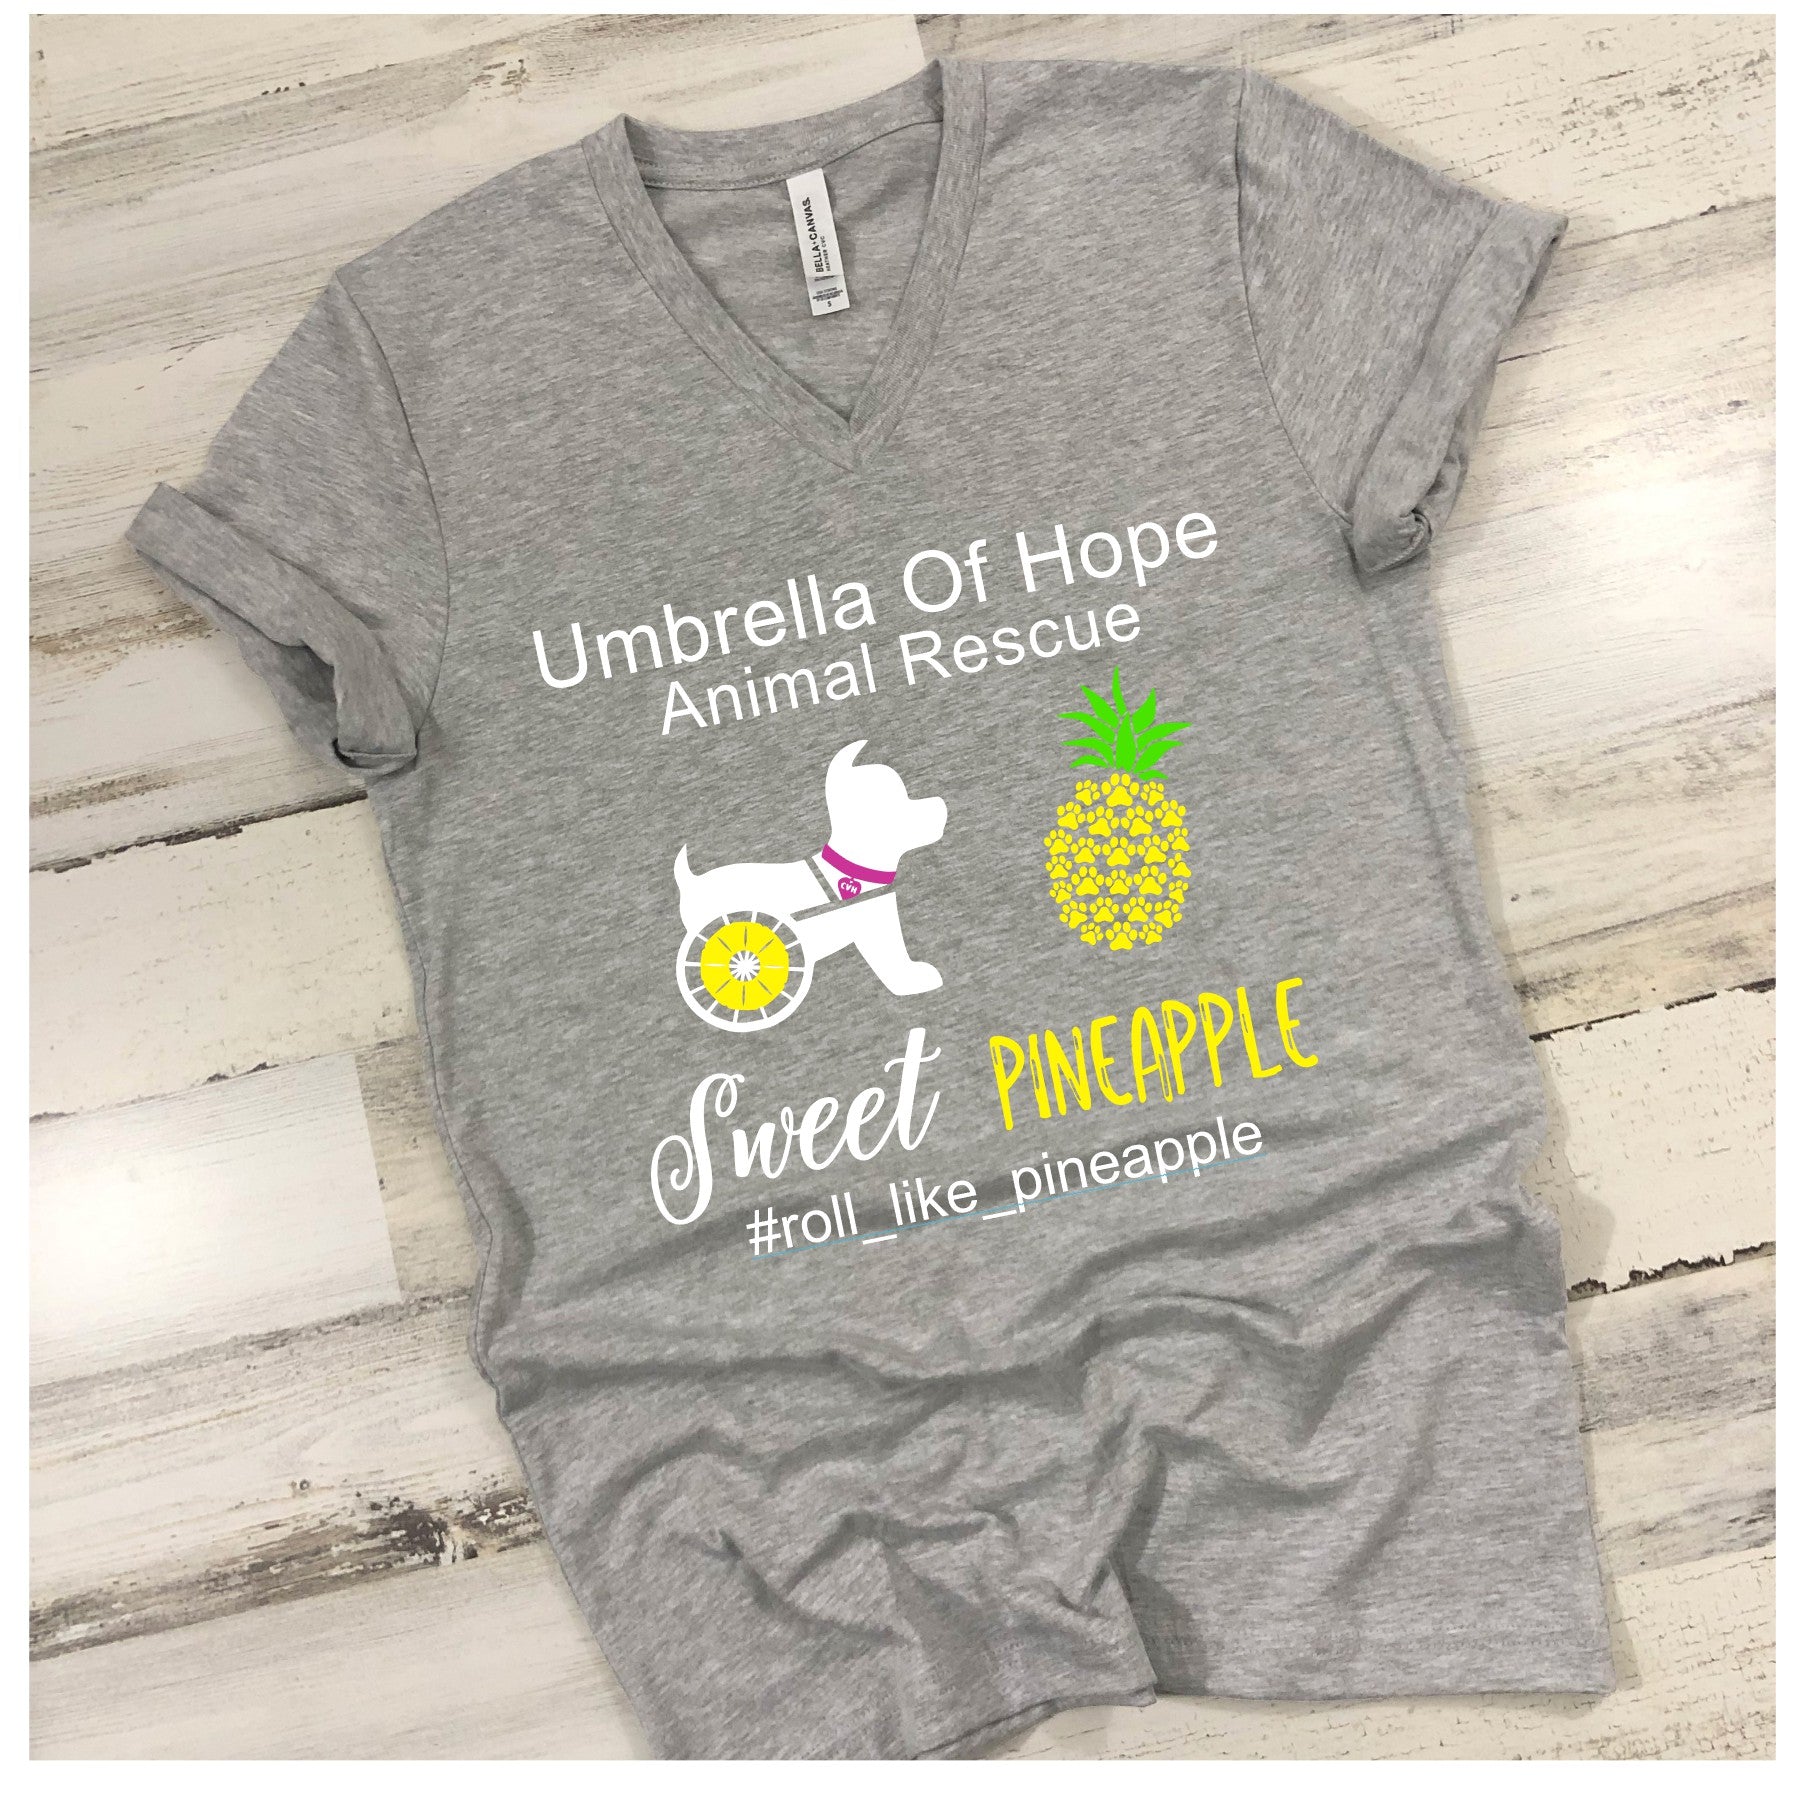 Sweet Pineapple Umbrella of Hope Relaxed Fit V-Neck - Ruff Life Rescue Wear